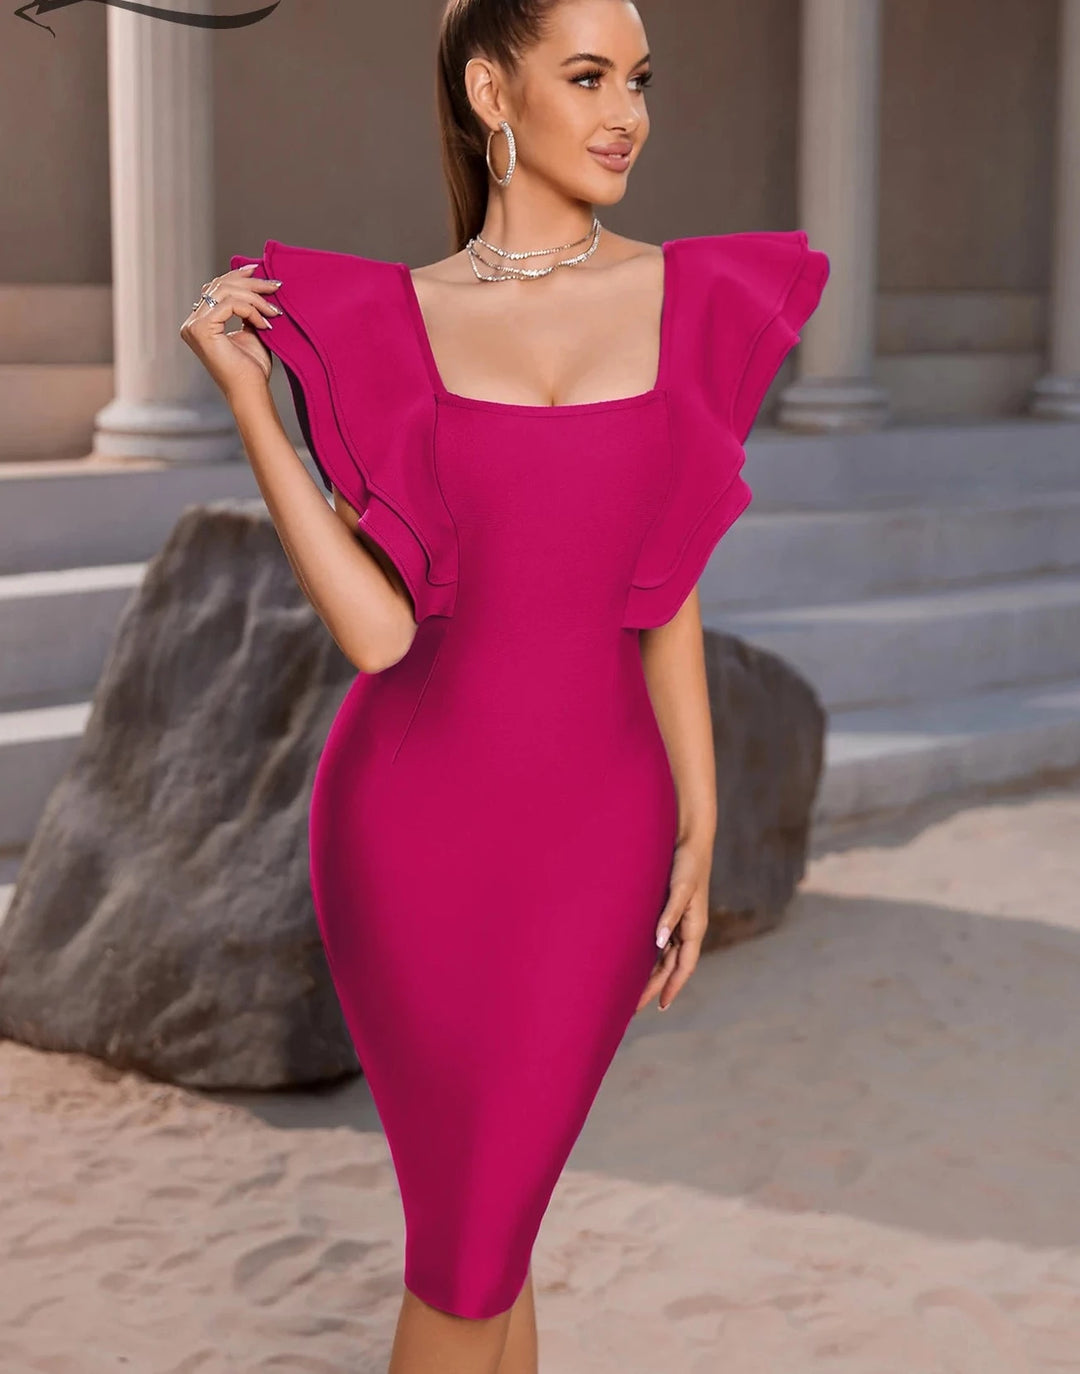 Bodycon Bandage Dress with Sexy Ruffles & Butterfly Sleeves - Divawearfashion